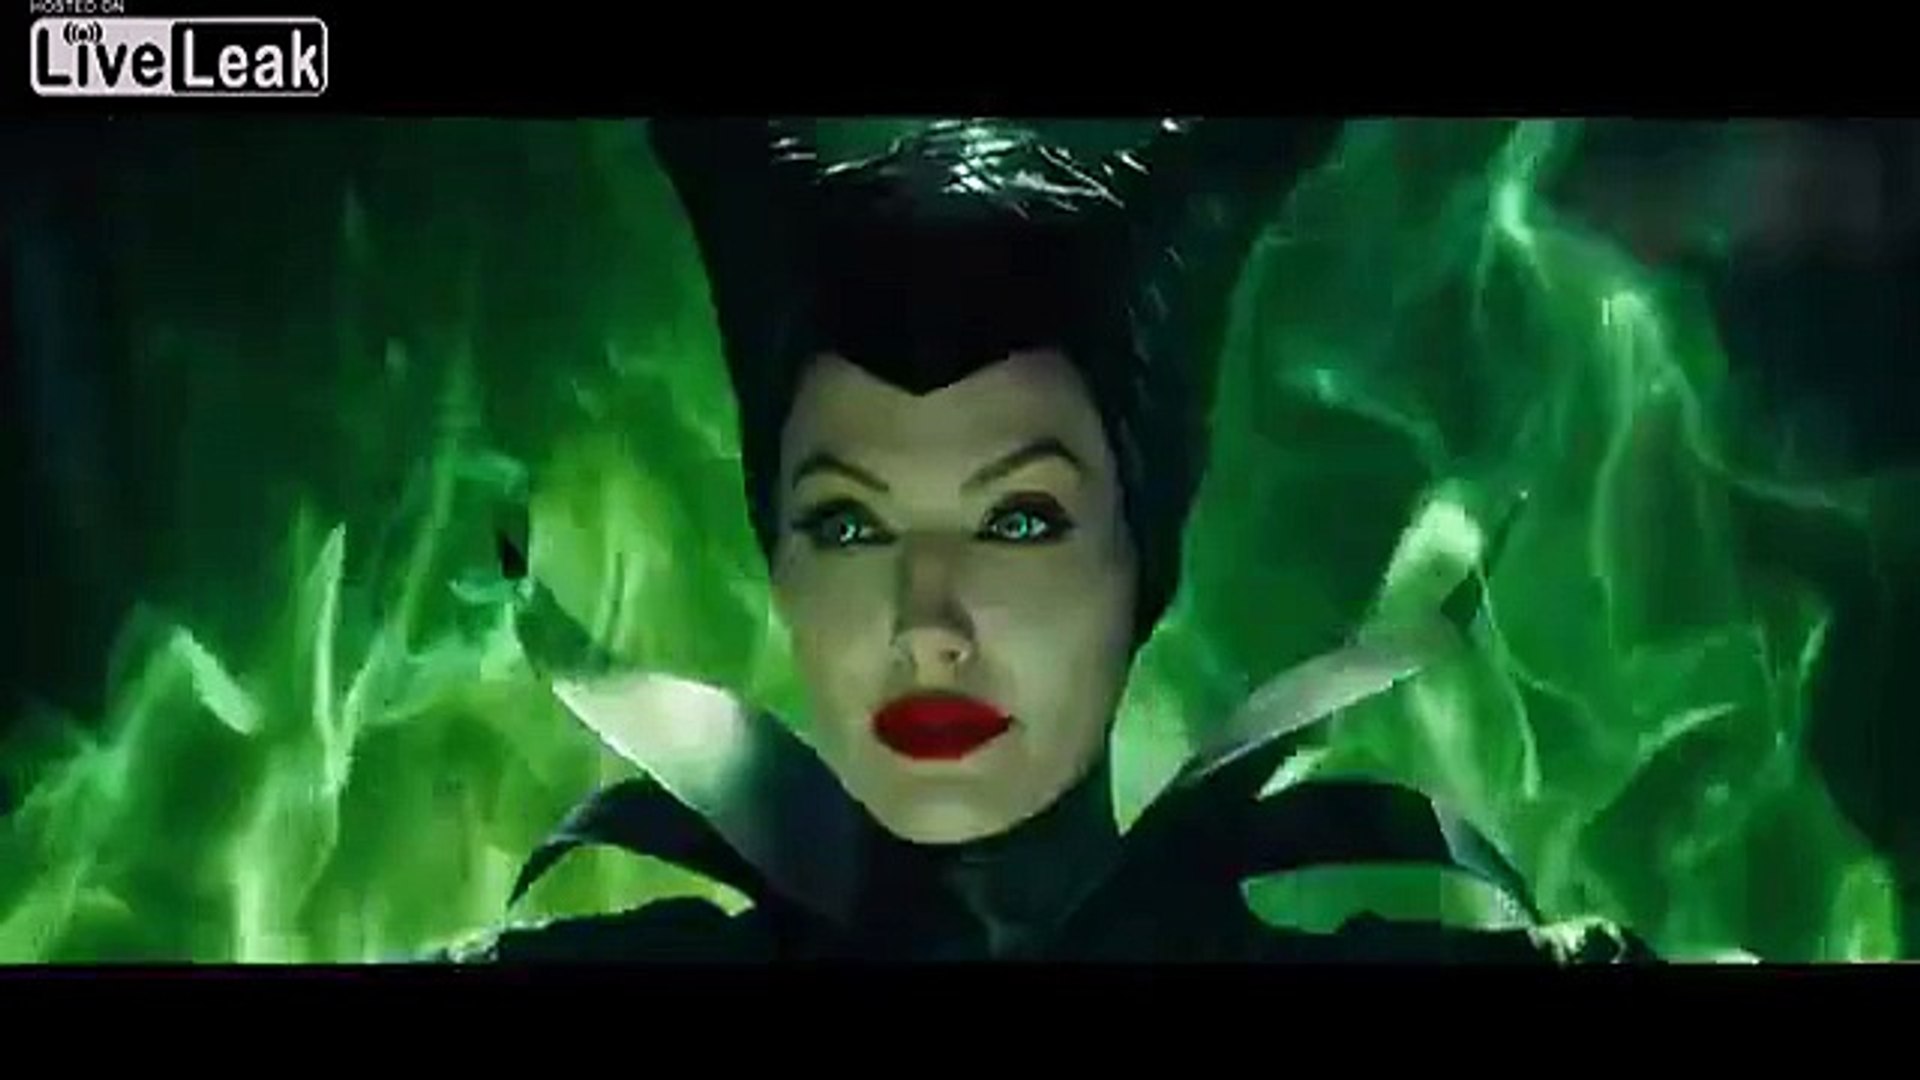 Lana Del Rey - Once Upon a Dream (Maleficent